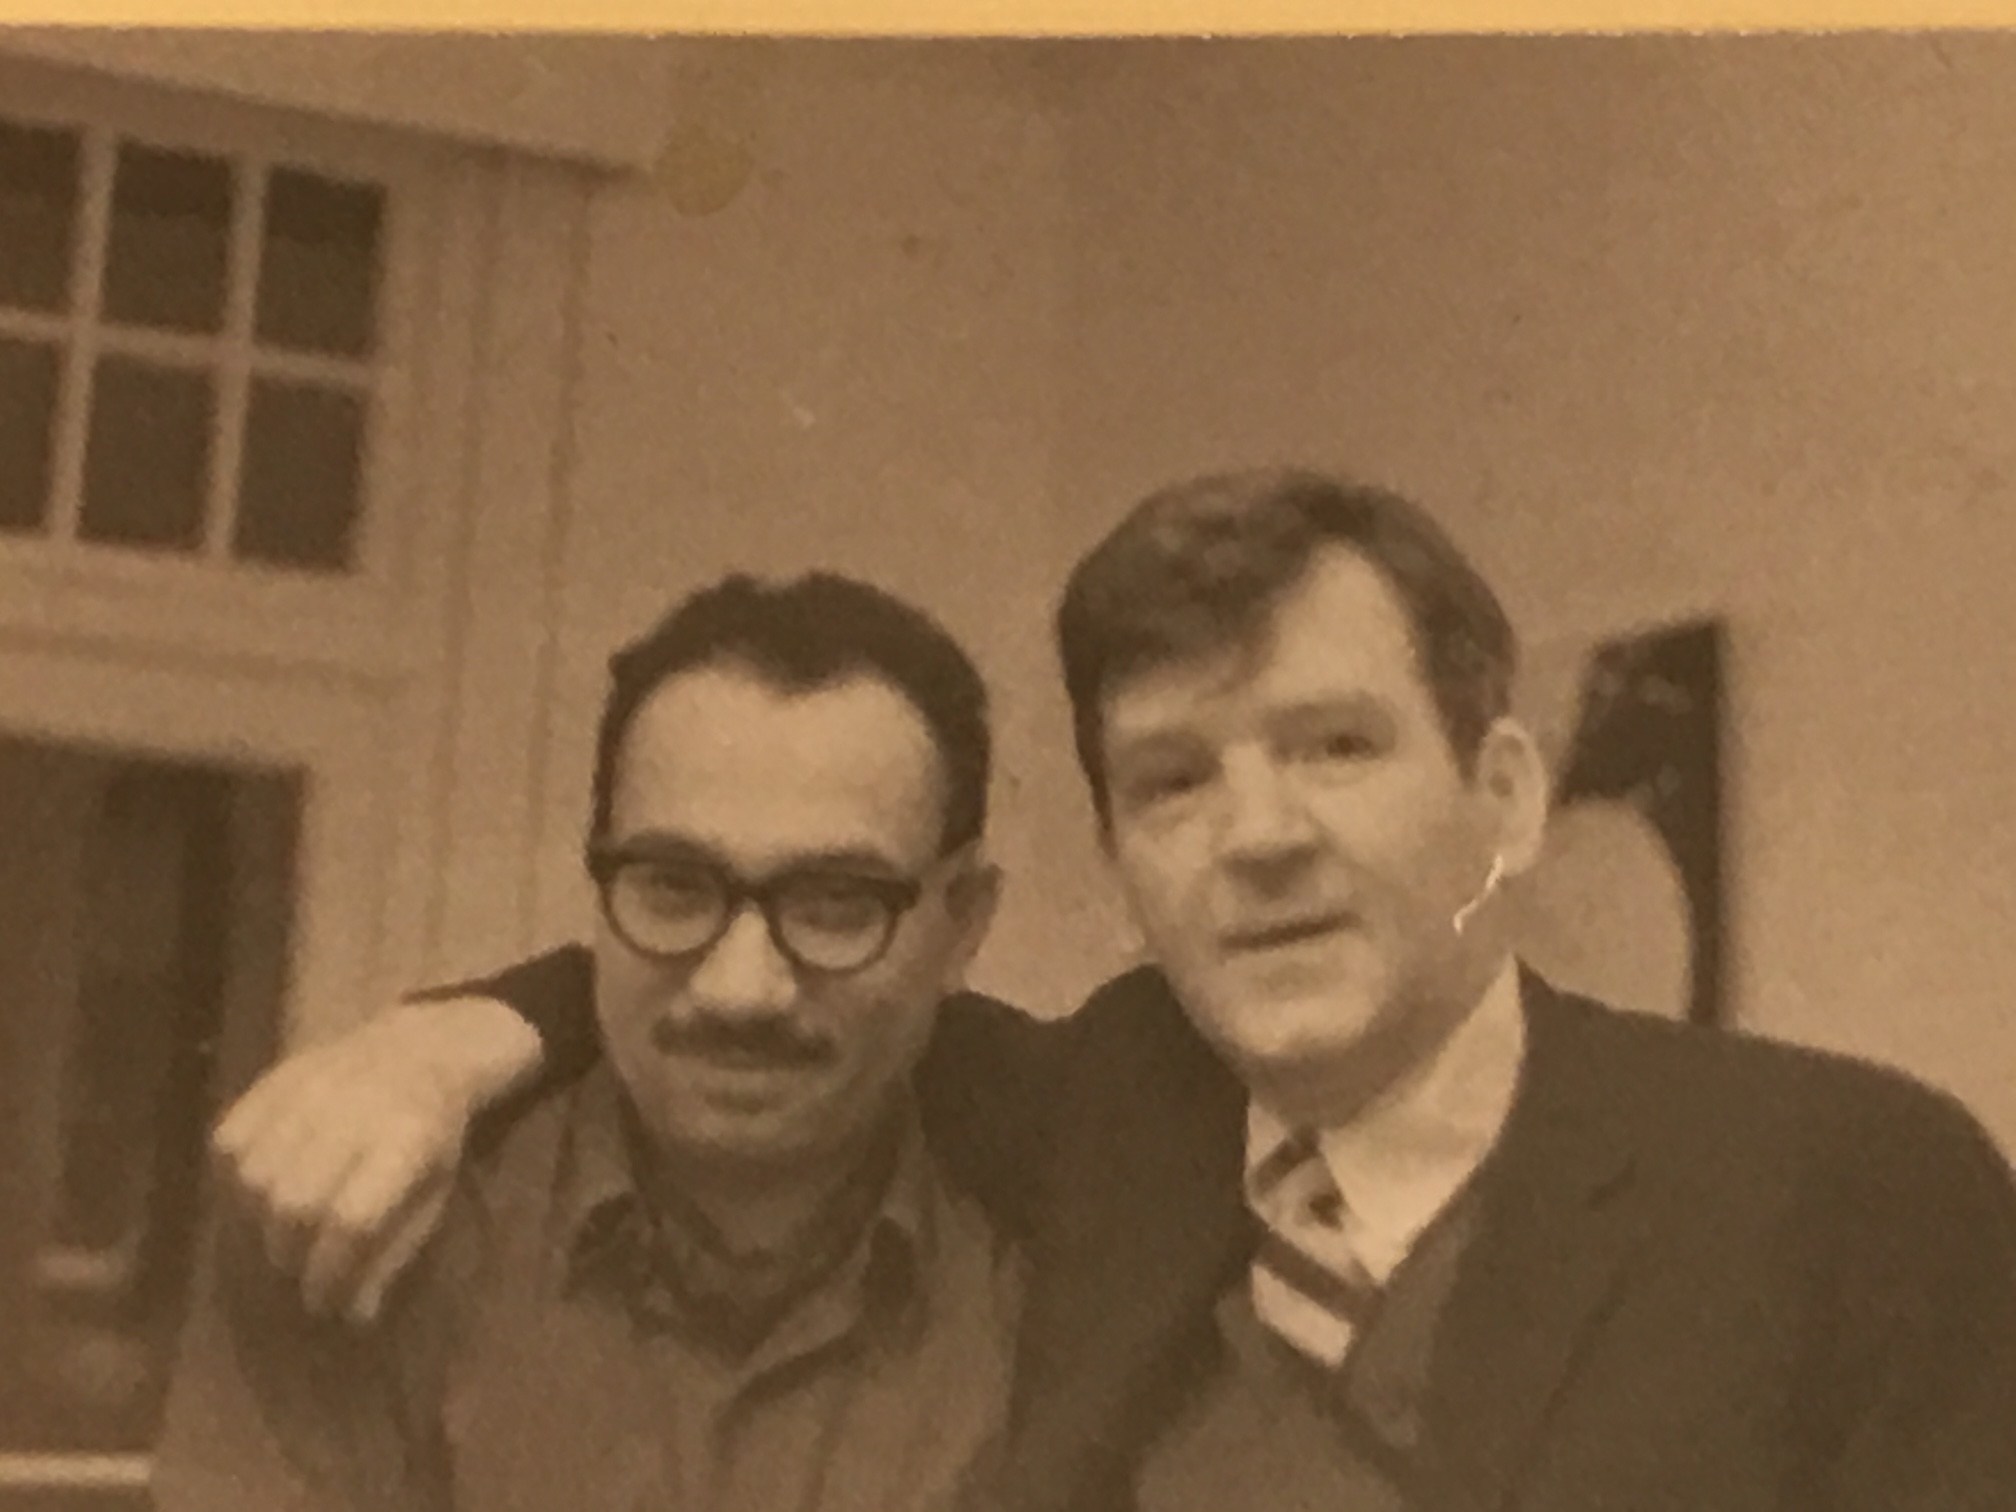  Richard Gibson, left, and Robert Taber, right, (Credit: Richard Gibson Papers, George Washington University)